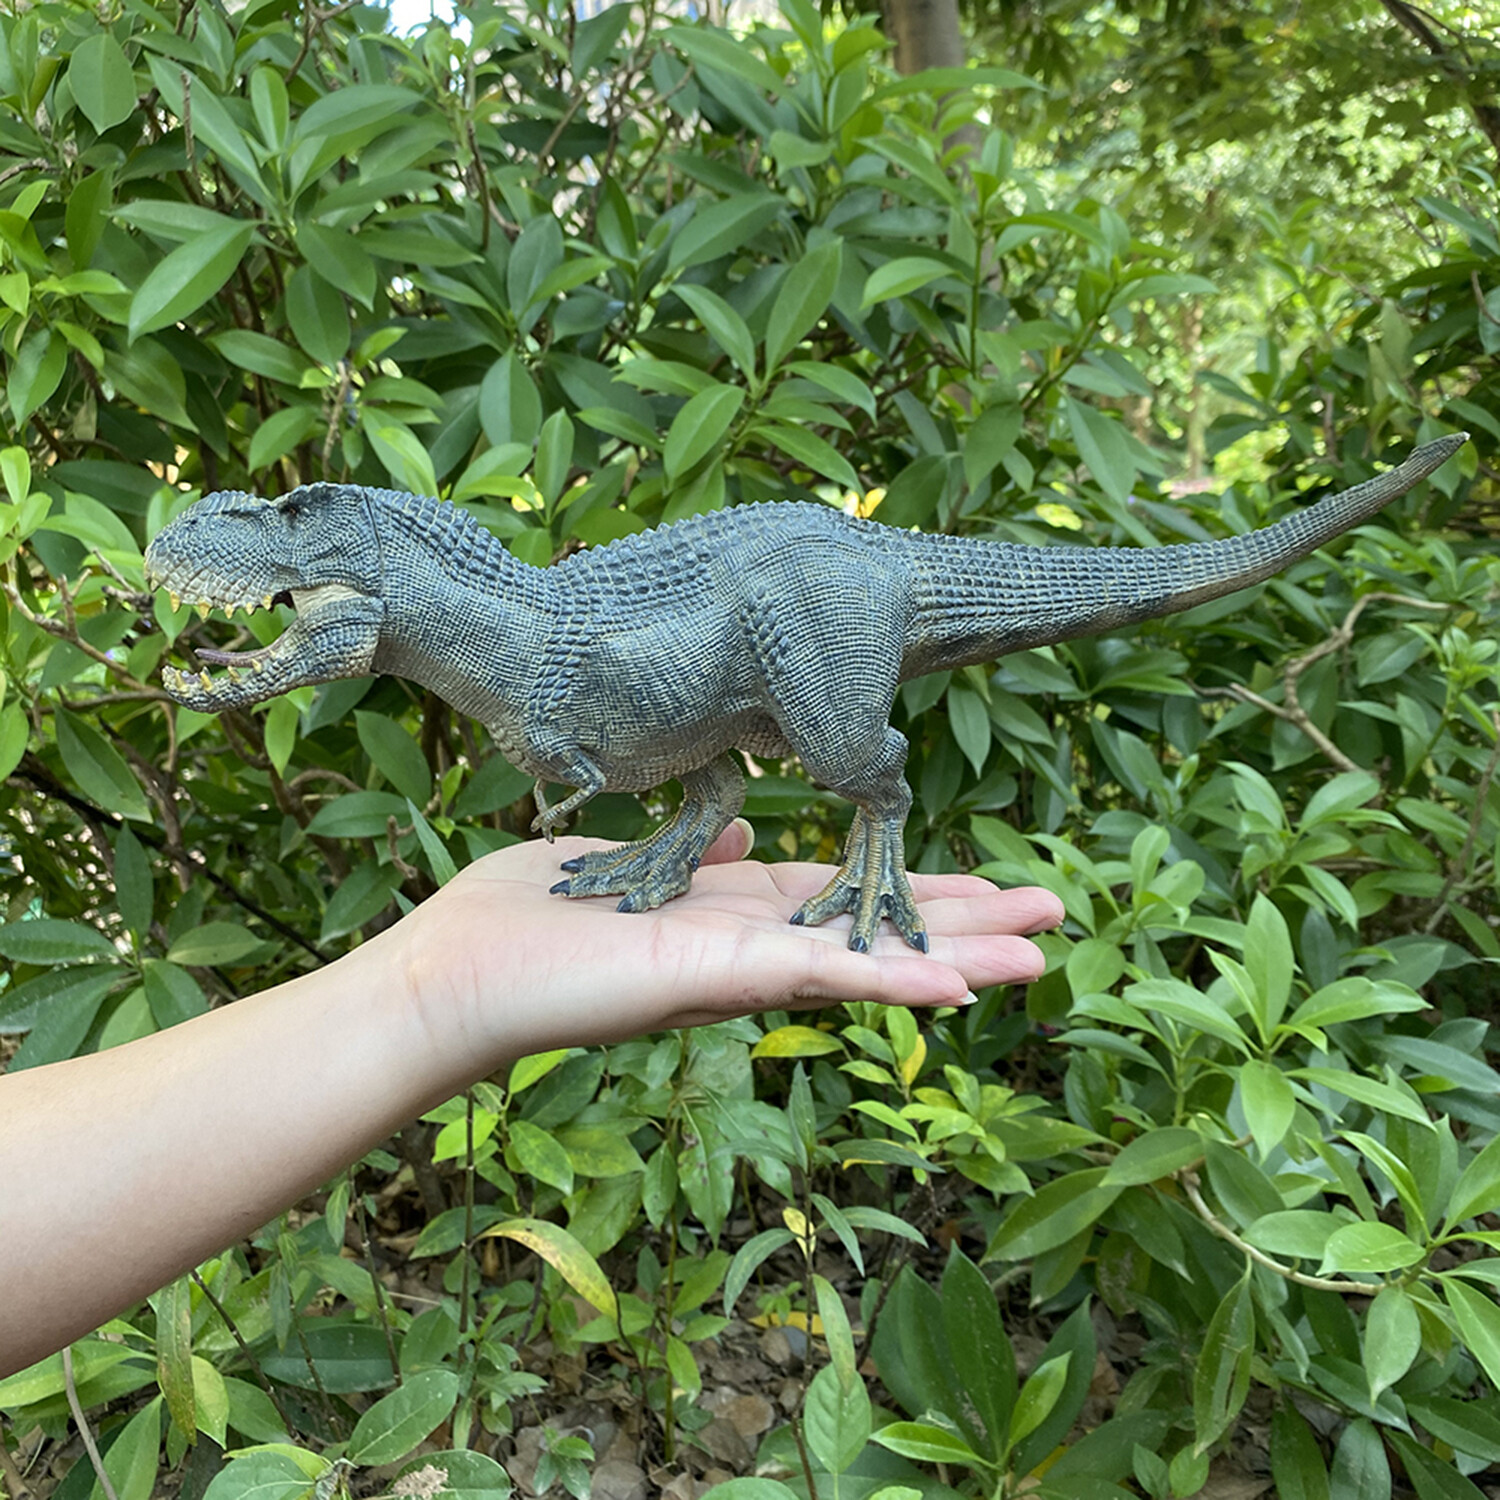 EOIVSH Dinosaur Toy Vastatosaurus Rex with Movable Jaw, Realistic Dinosaur  Action Figure Vrex Toy Plastic Educational Animal Model Figurine for Collec 